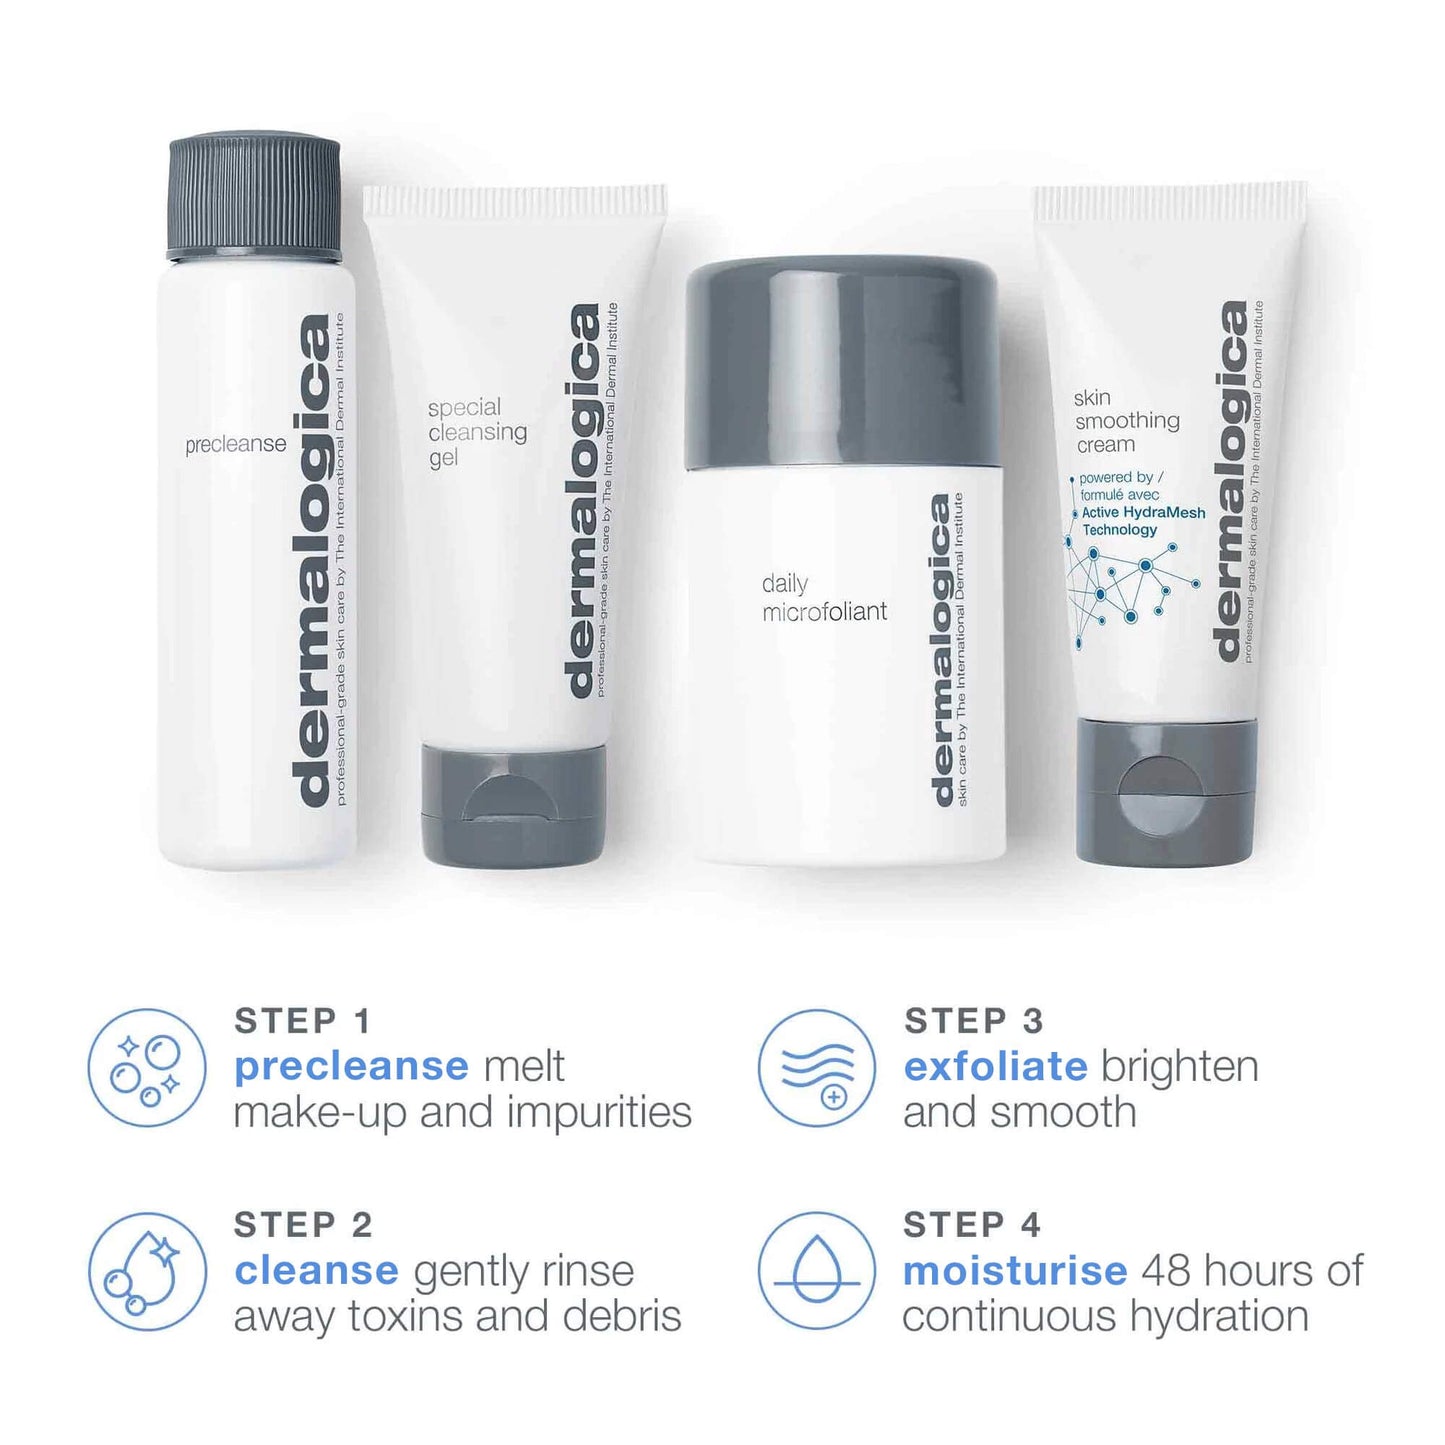 Discover healthy skin kit products with steps. 1, Precleanse melt make-up and impurities. 2, cleanse gently rinse away toxins and debris. 3, exfoliate bright and smooth. 4, moisturise 48 hours of continuous hydration.